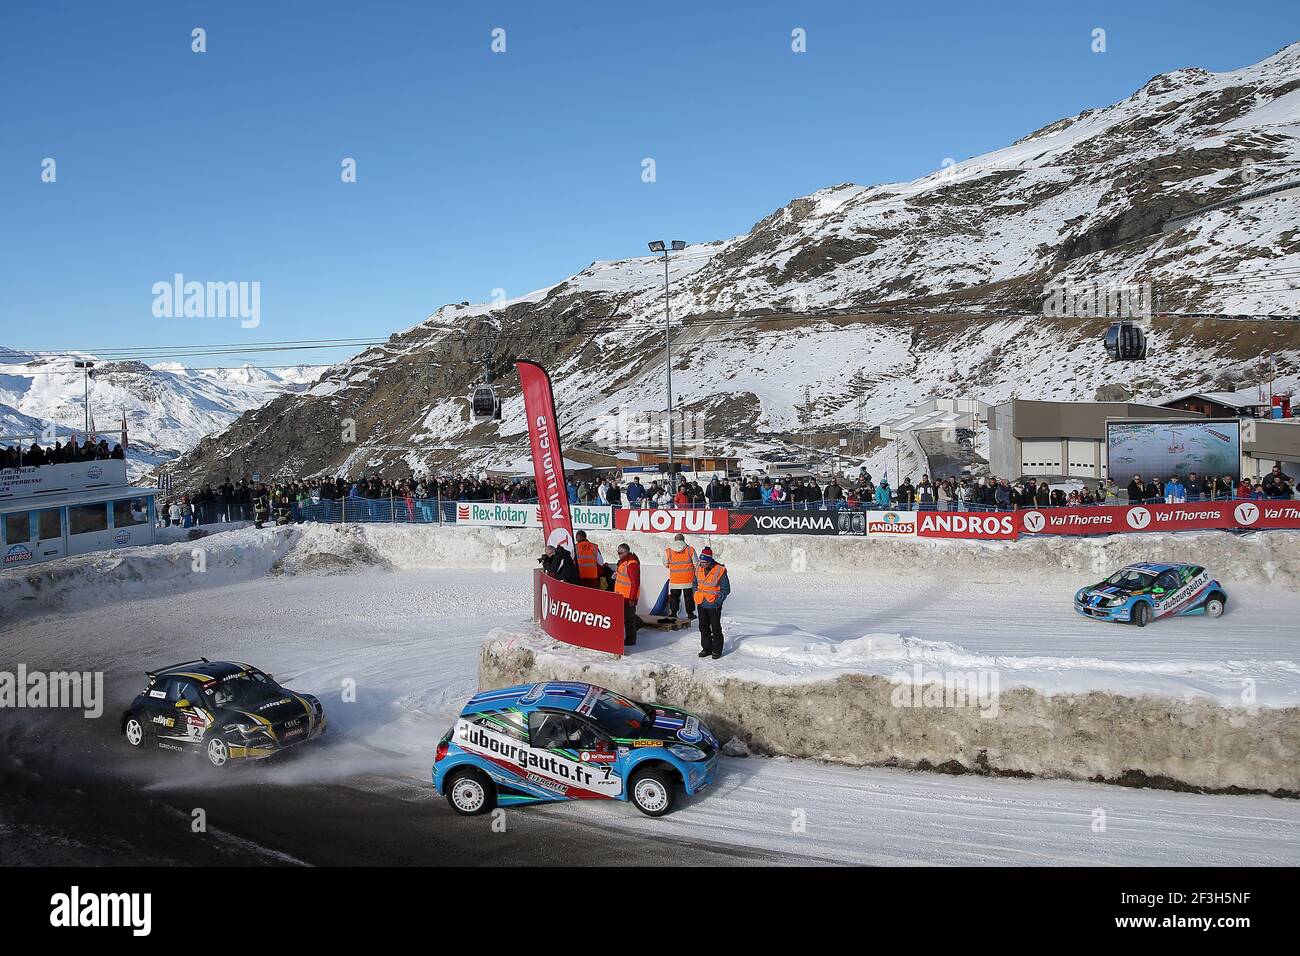 07 DUBOURG Andréa JOUET Christophe Clio 3 action02 PANIS Olivier DEMOUSTIER  Berenice Audi A1 Quattro action during the 2015 and 2016 Ice Trophy Andros,  Val Thorens circuit, from December 5th to 6th